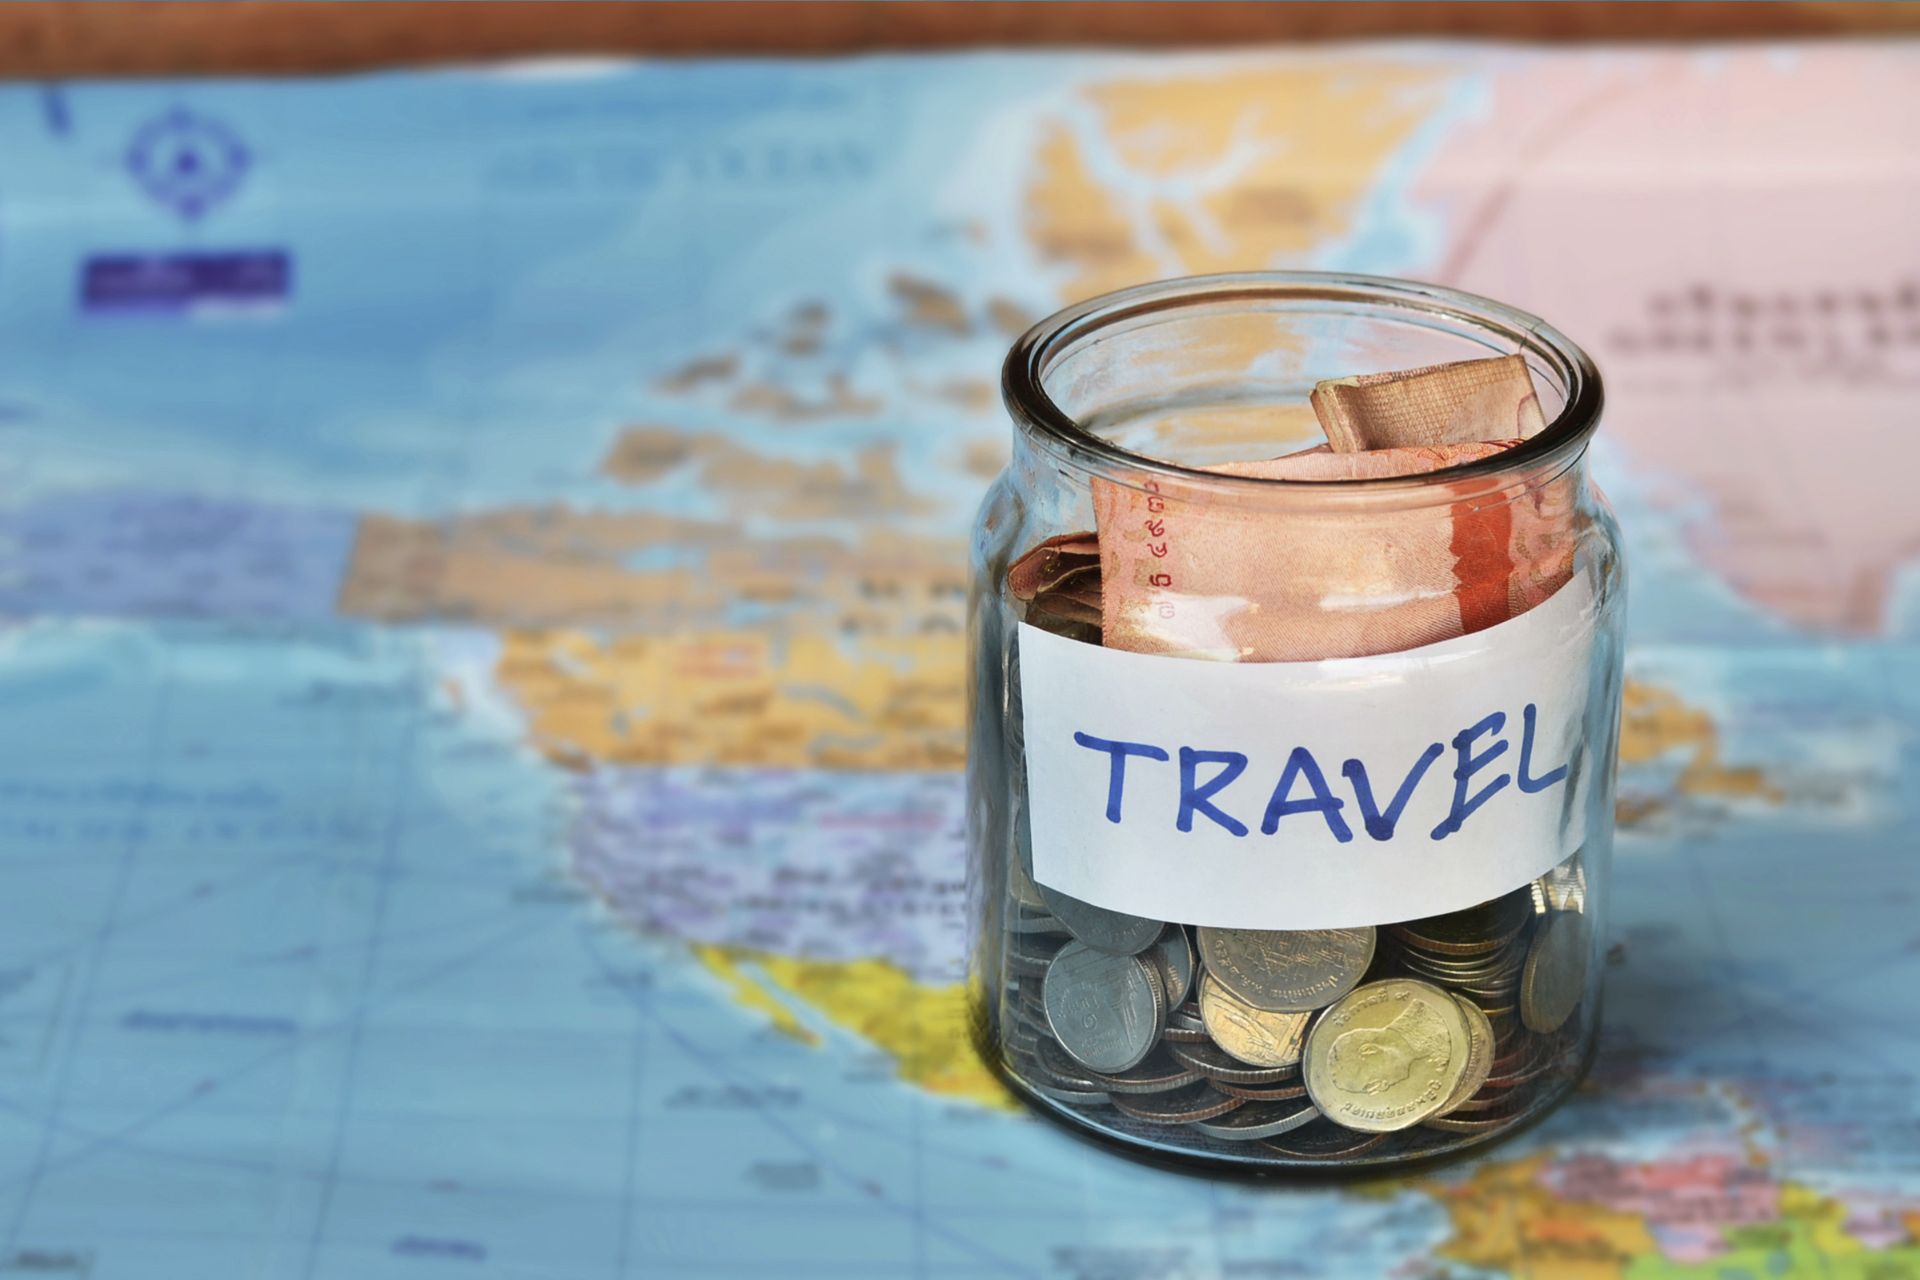 Travel on a budget